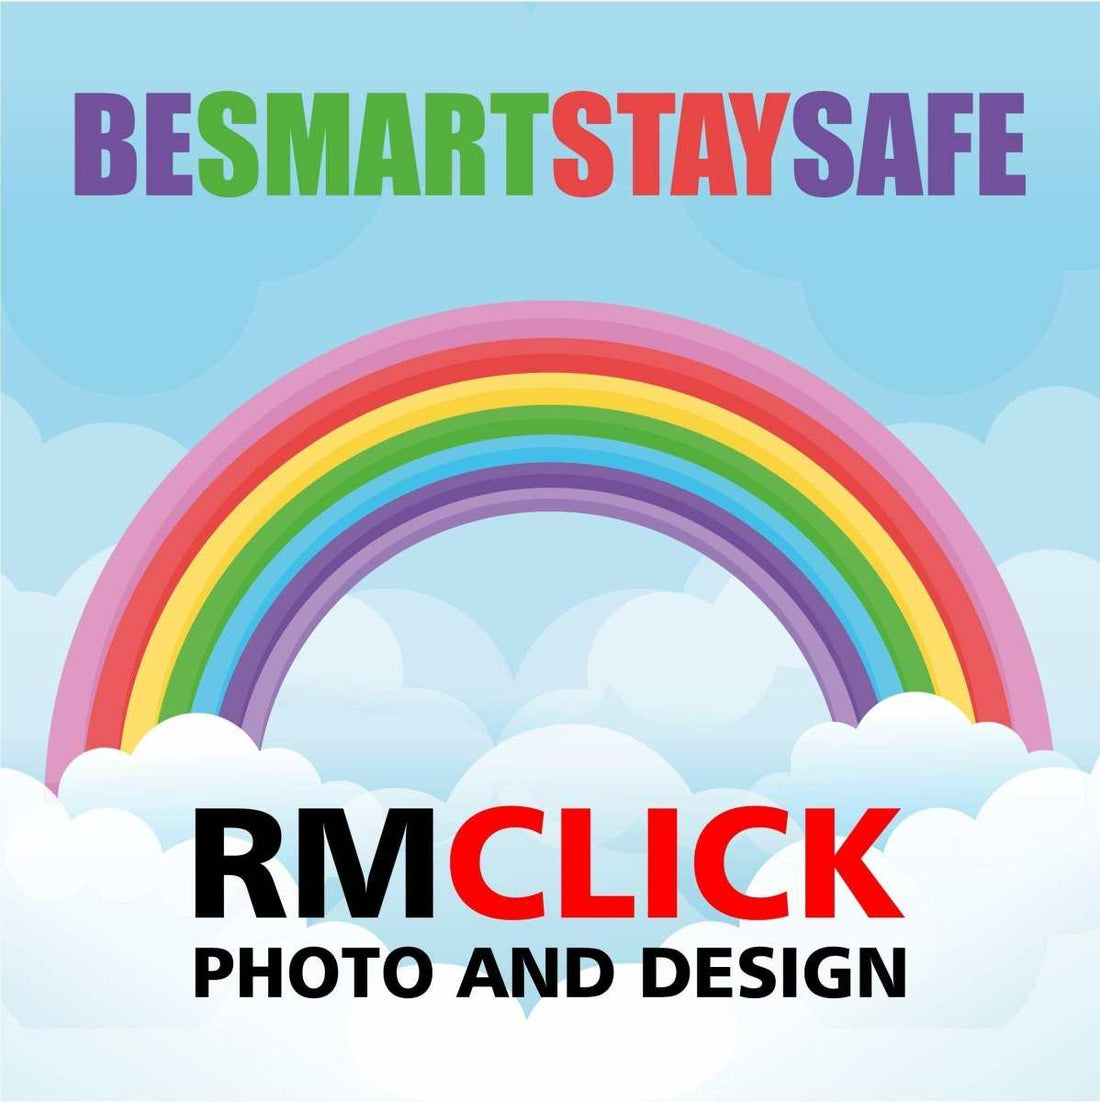 Be Smart Stay Safe 👨‍👩‍👧‍👦 - RMCLICK